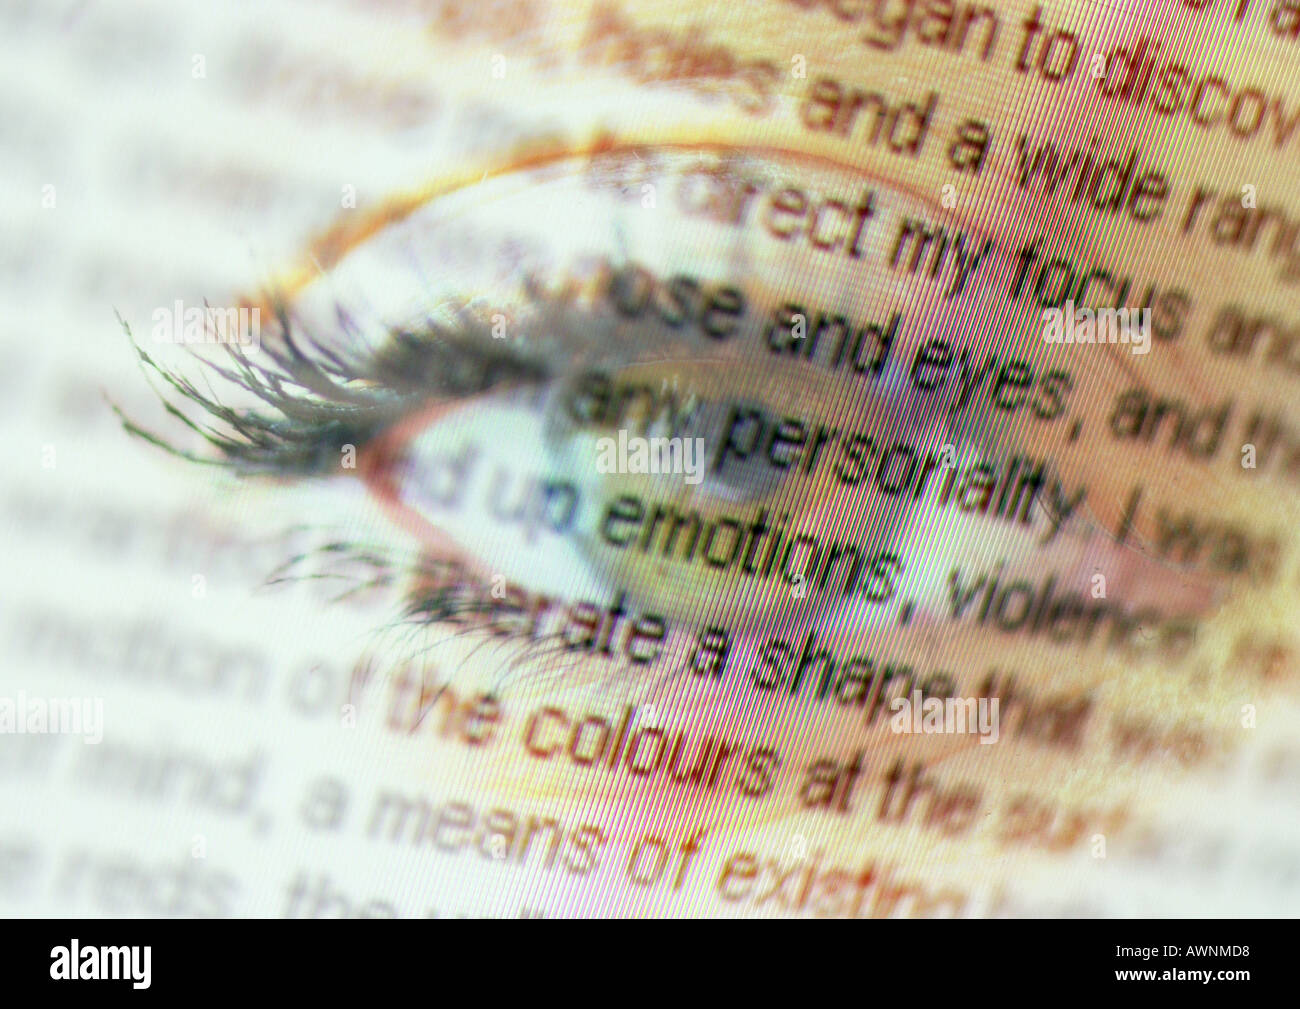 Story text overlaying close up of an eye, montage Stock Photo